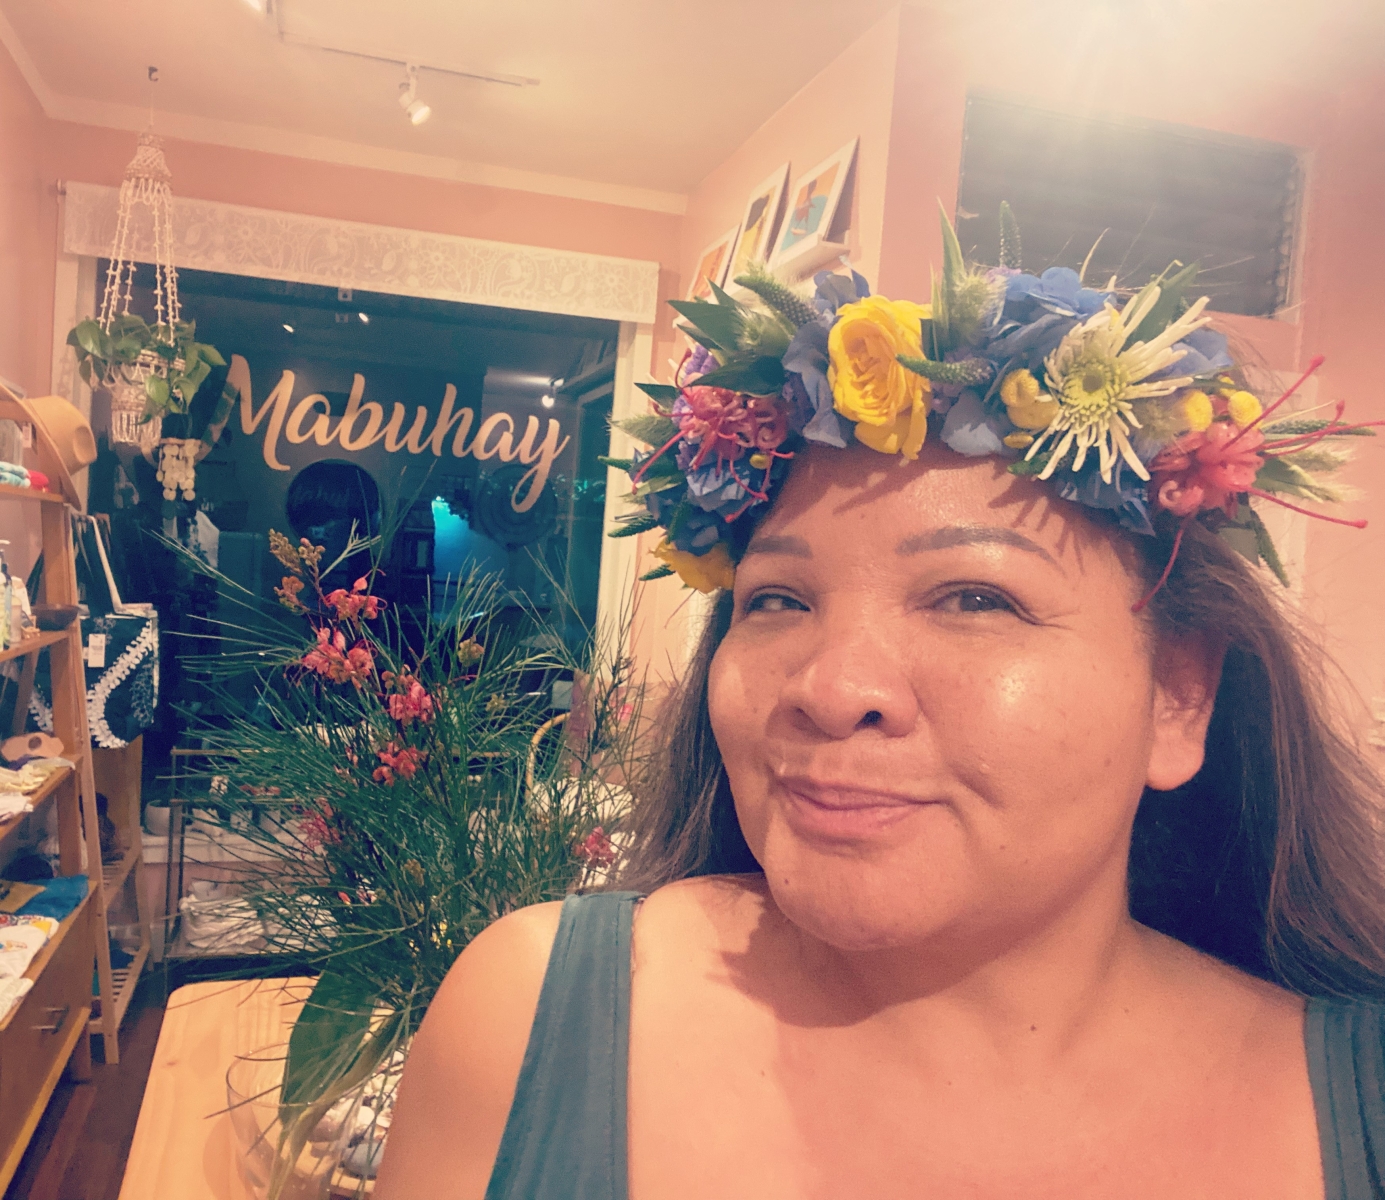 Woman smiling with a flower crown